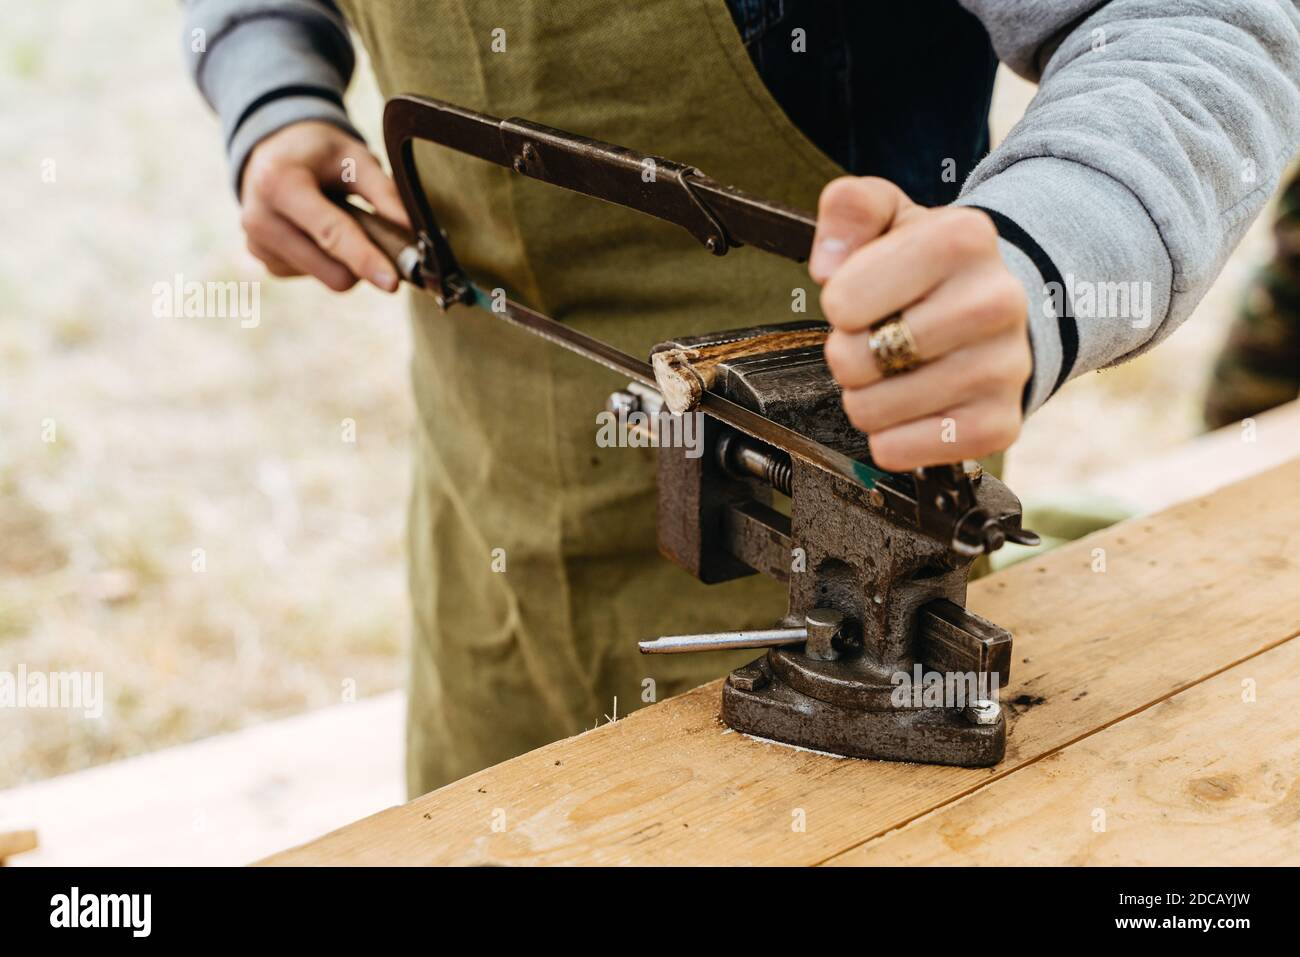 Handyman working with metal at the workshop. Stock Photo